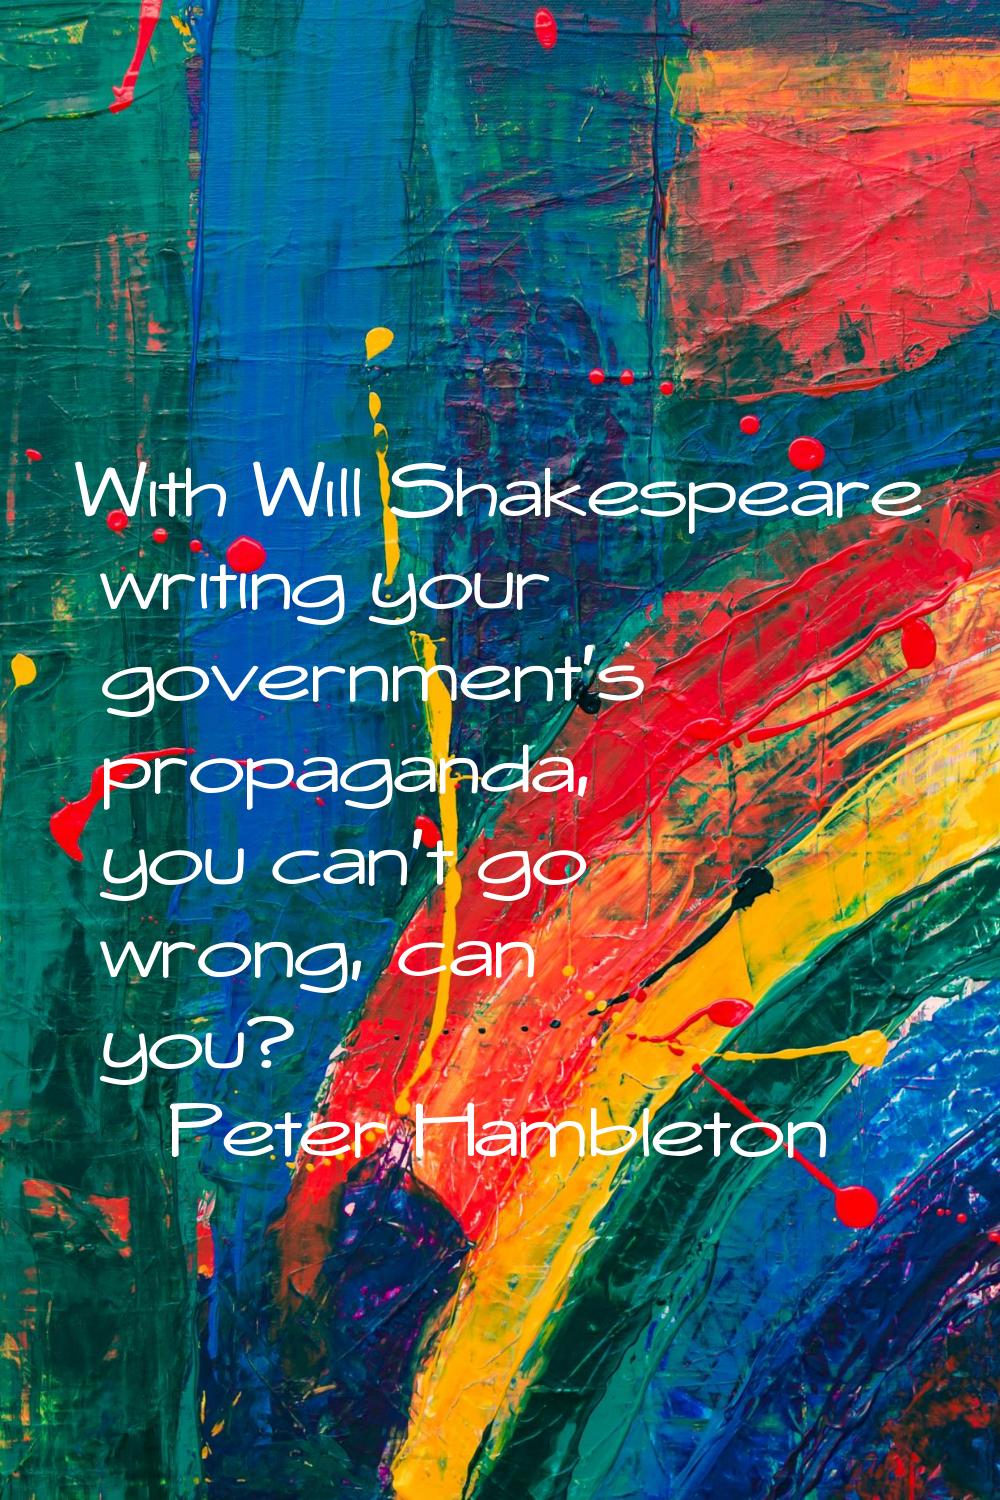 With Will Shakespeare writing your government's propaganda, you can't go wrong, can you?